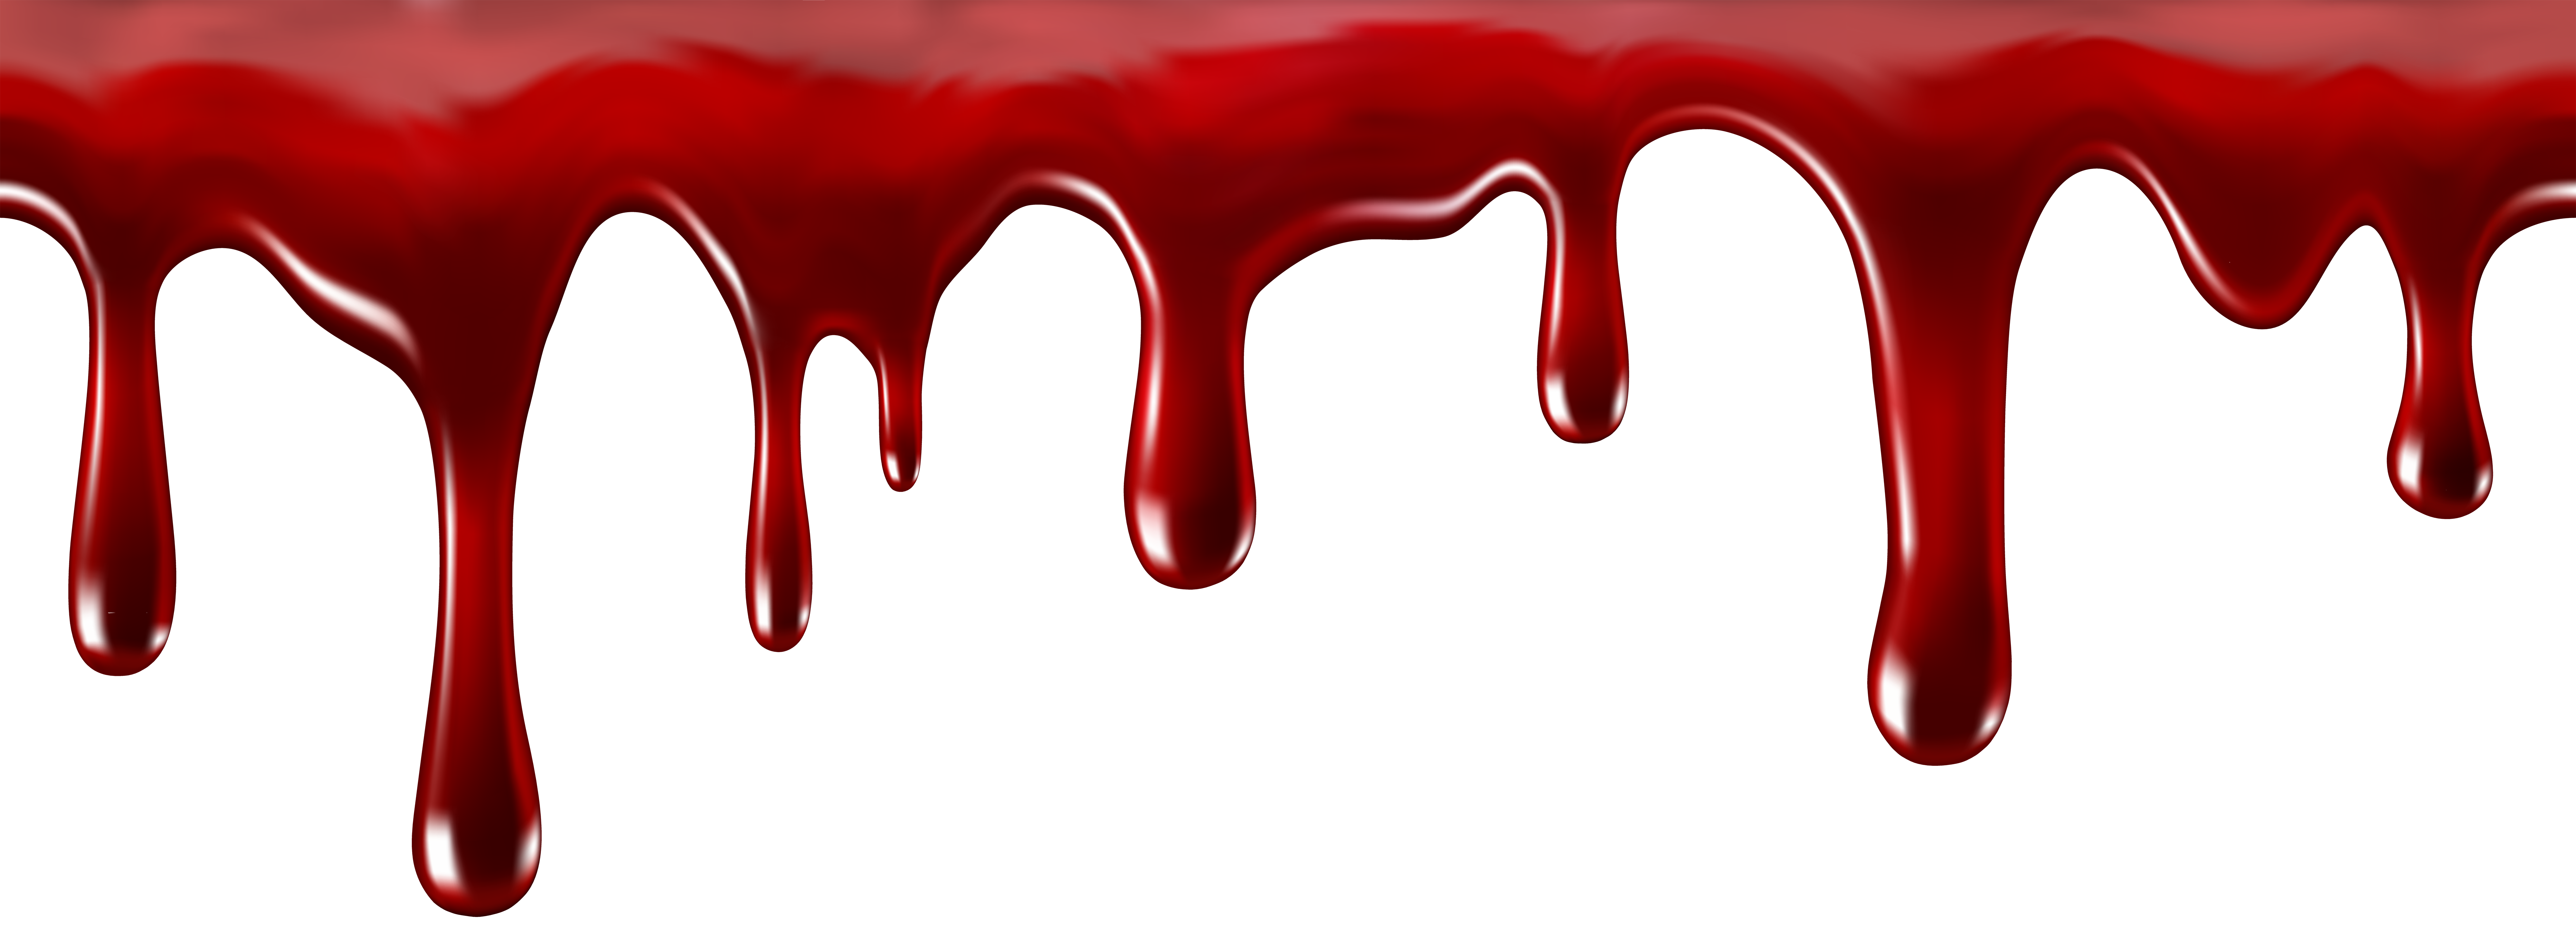 clipart images of blood - photo #45